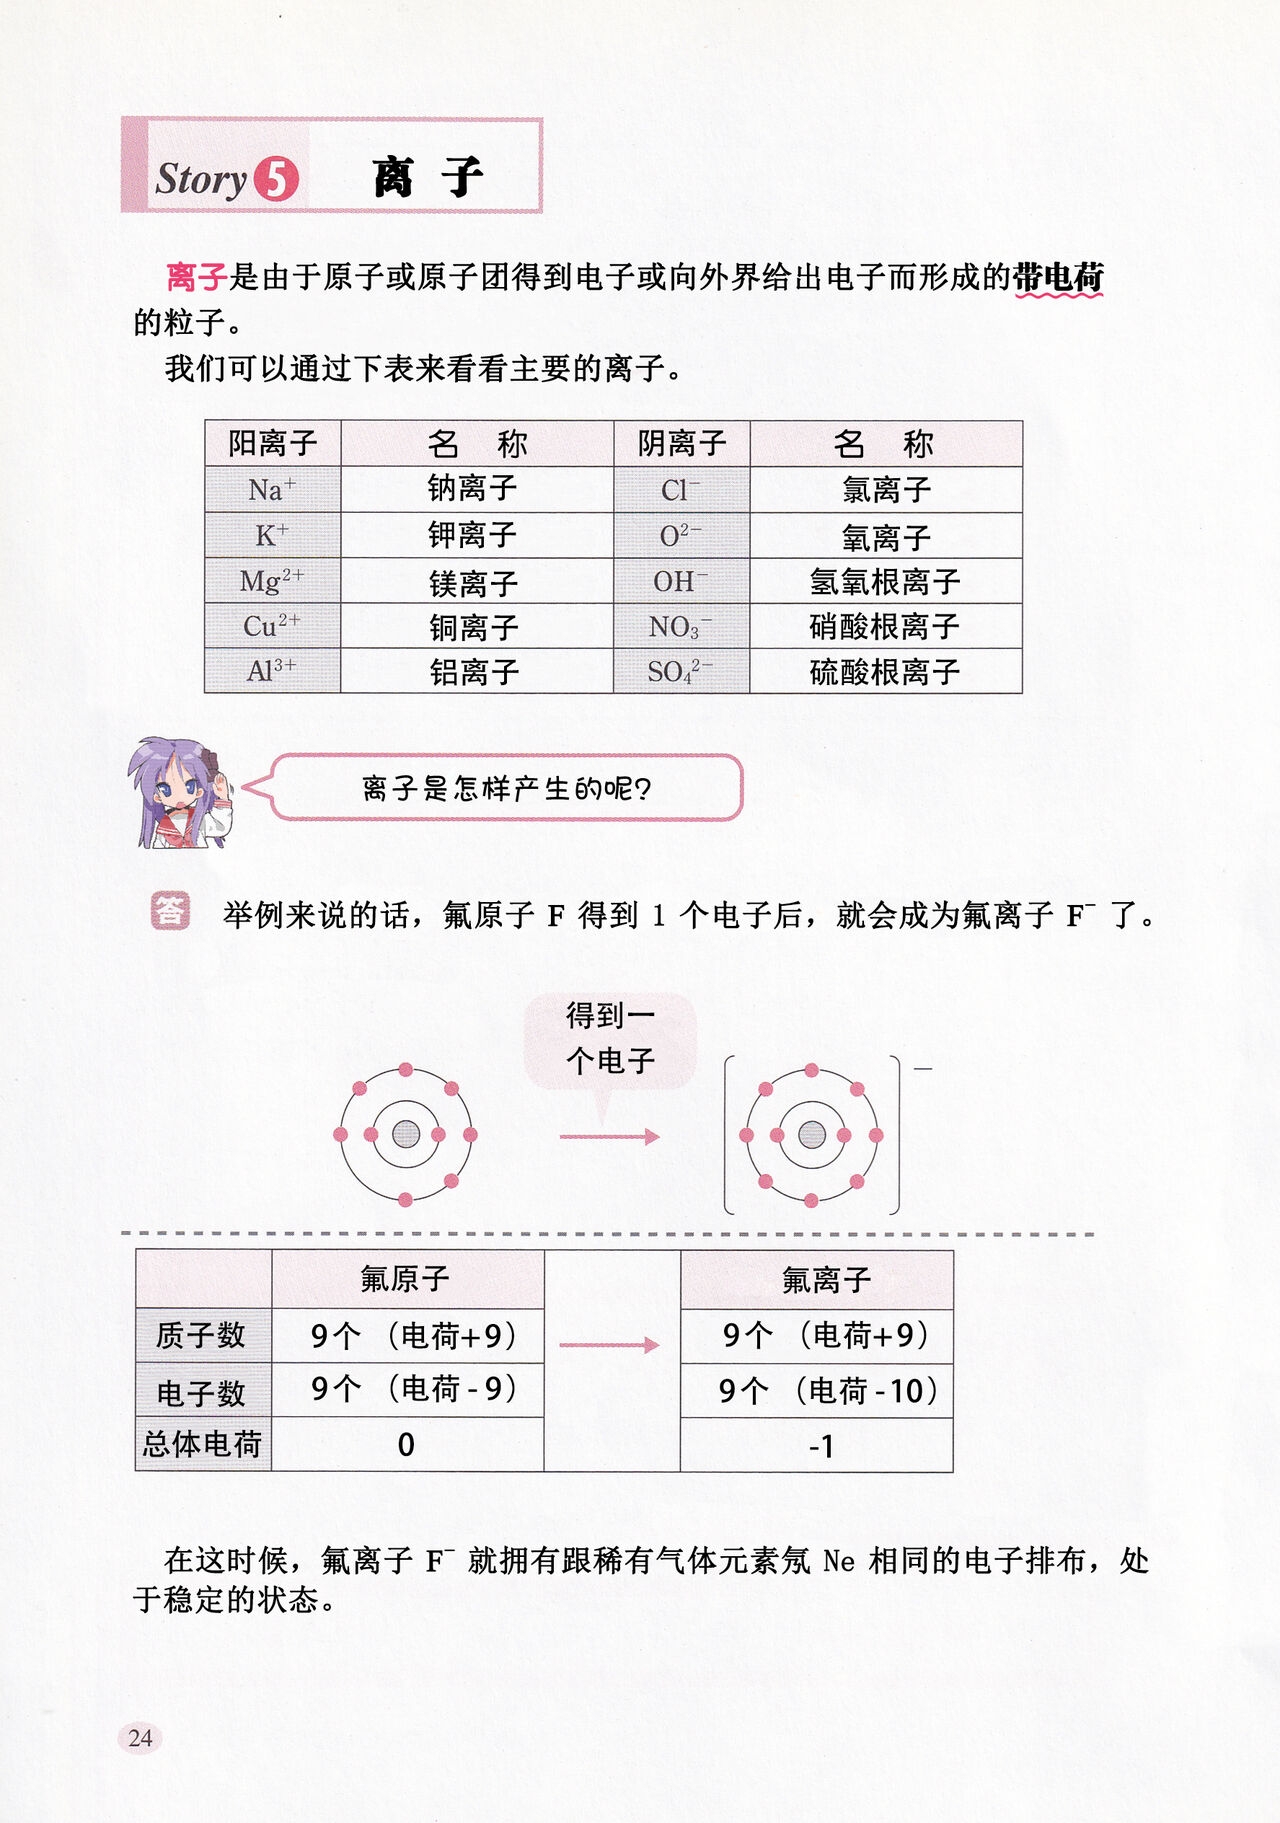 Let's Learn Chemistry with Lucky☆Star -Basic Theory- Section 1-5|和幸运星一起学化学 -理论篇- 第1-5章[Chinese][桃樹漢化組] 30